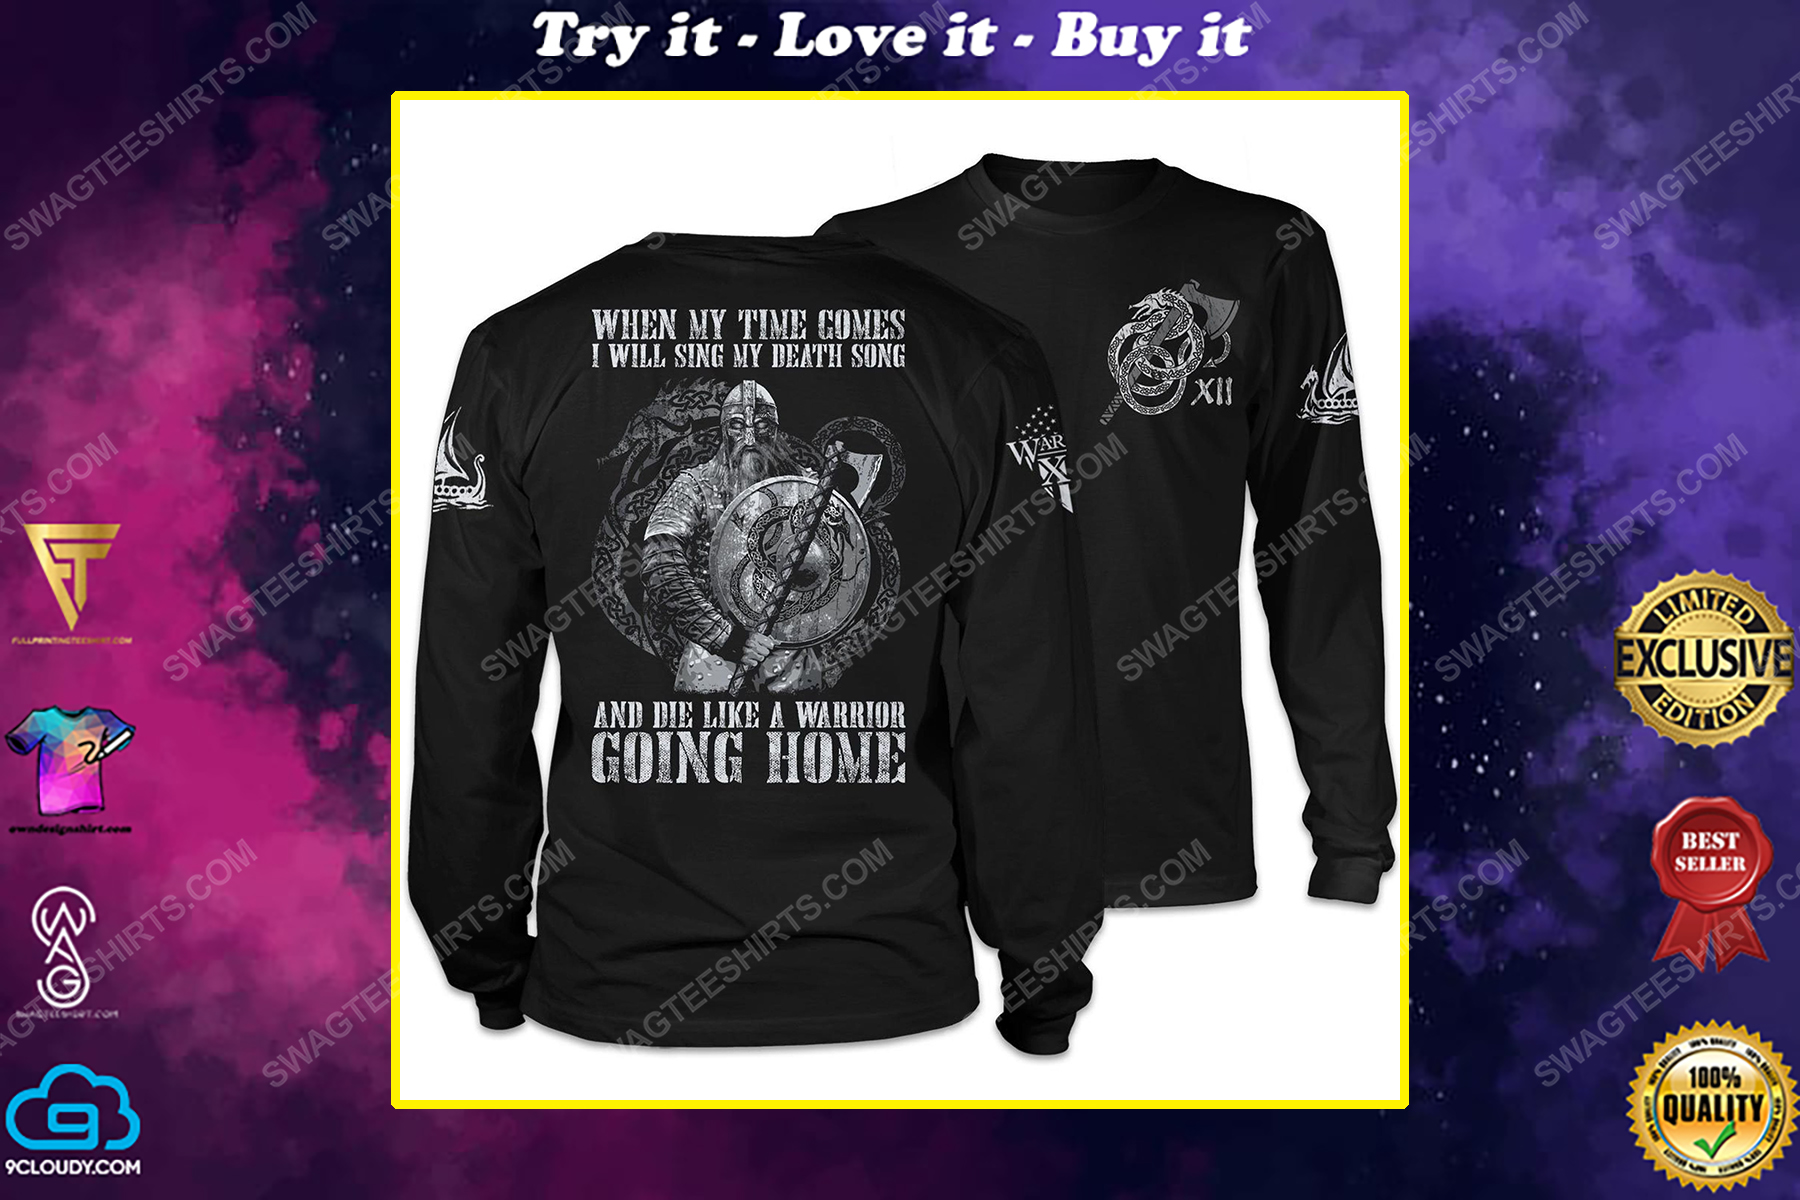 Viking when my time comes i will sing my death song and die like a warrior going home shirt